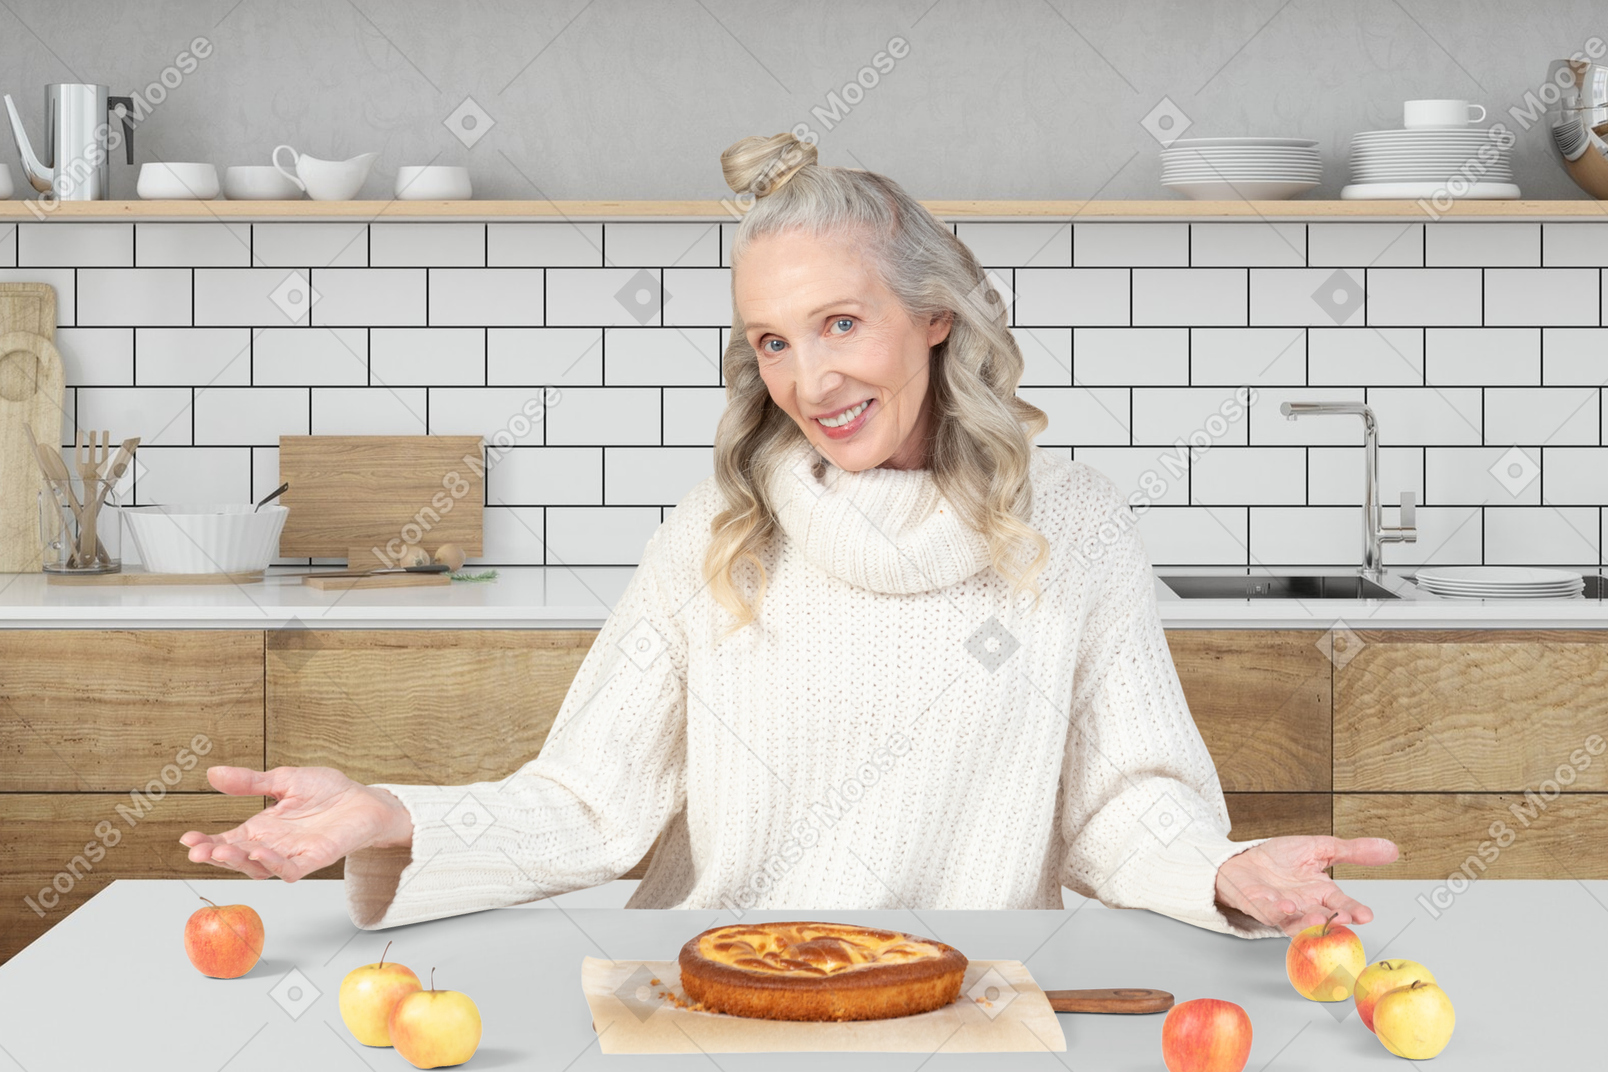 A woman sitting at a table with an apple pie in front of her